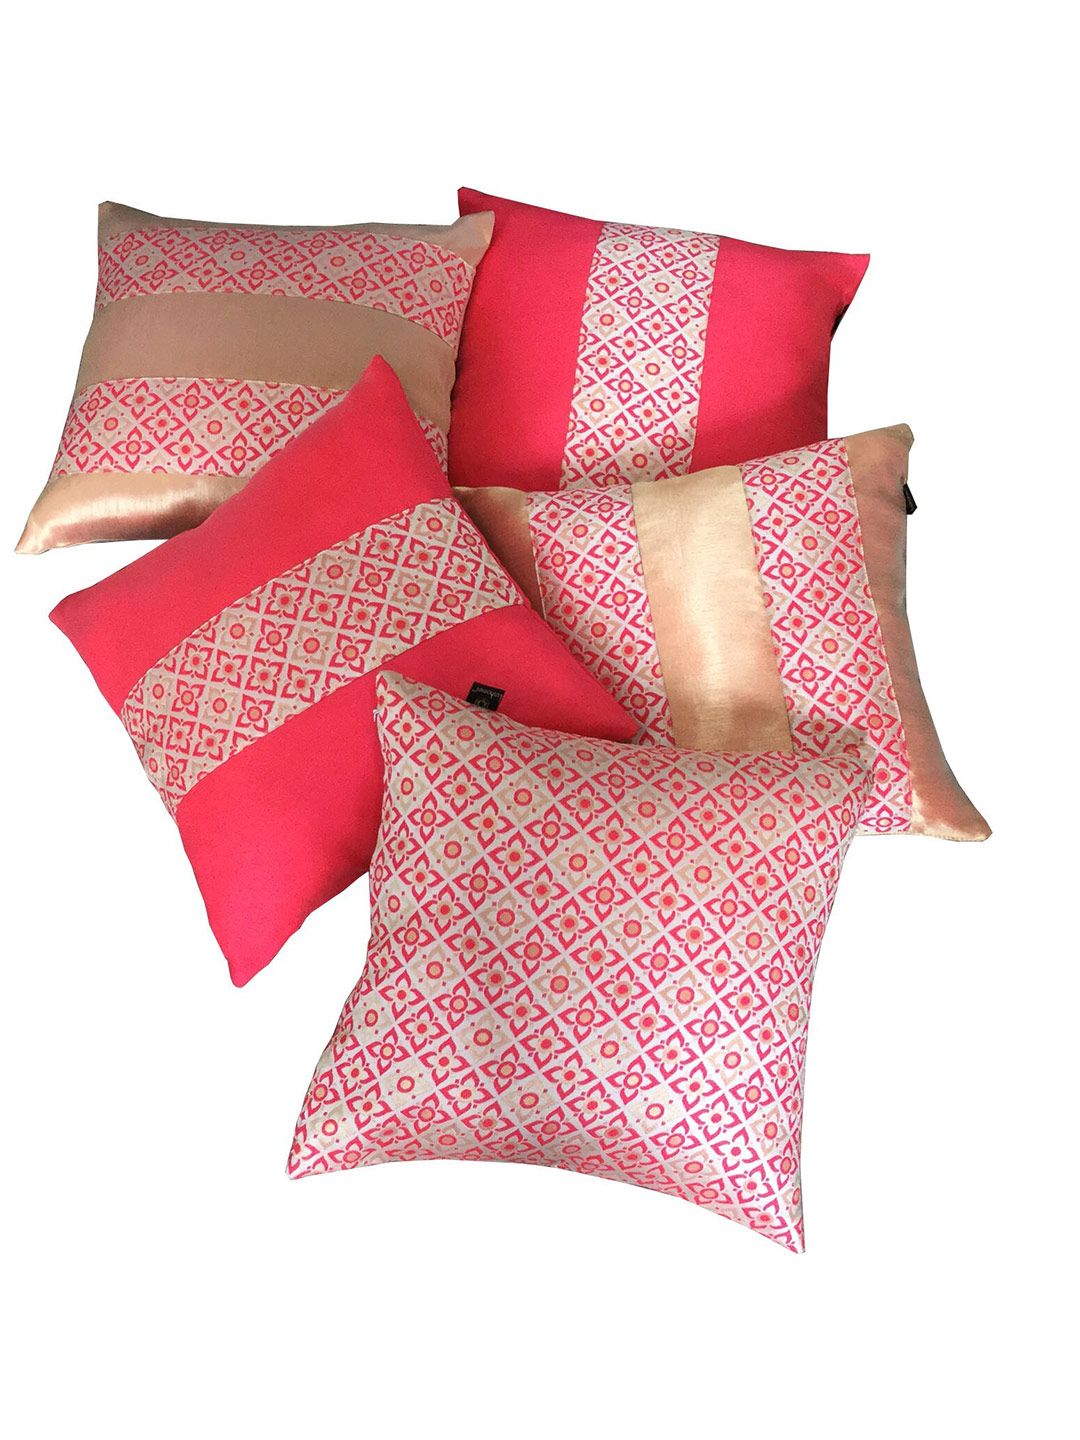 Lushomes Red & Beige Set of 5 Ethnic Motifs Square Cushion Covers Price in India